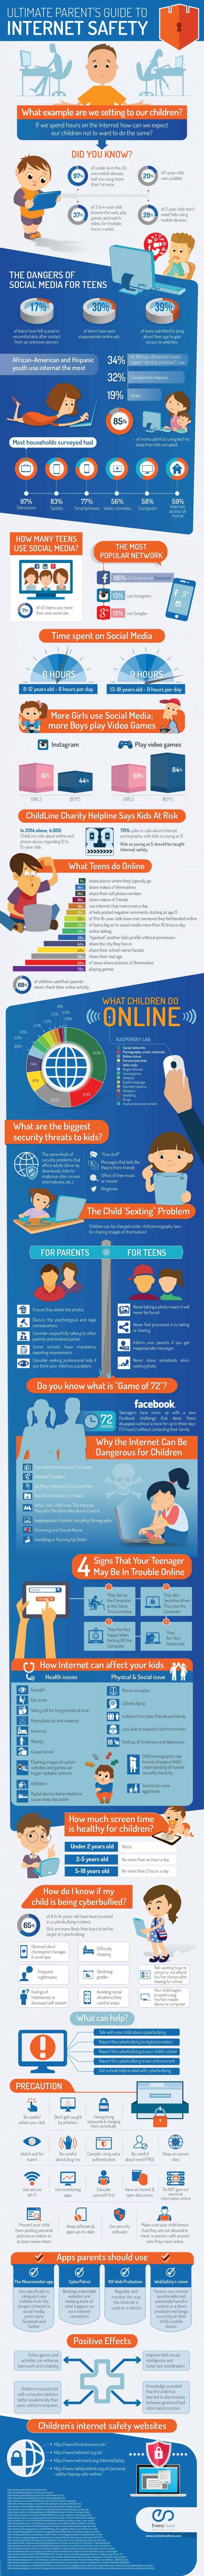 parent guide to internet safety